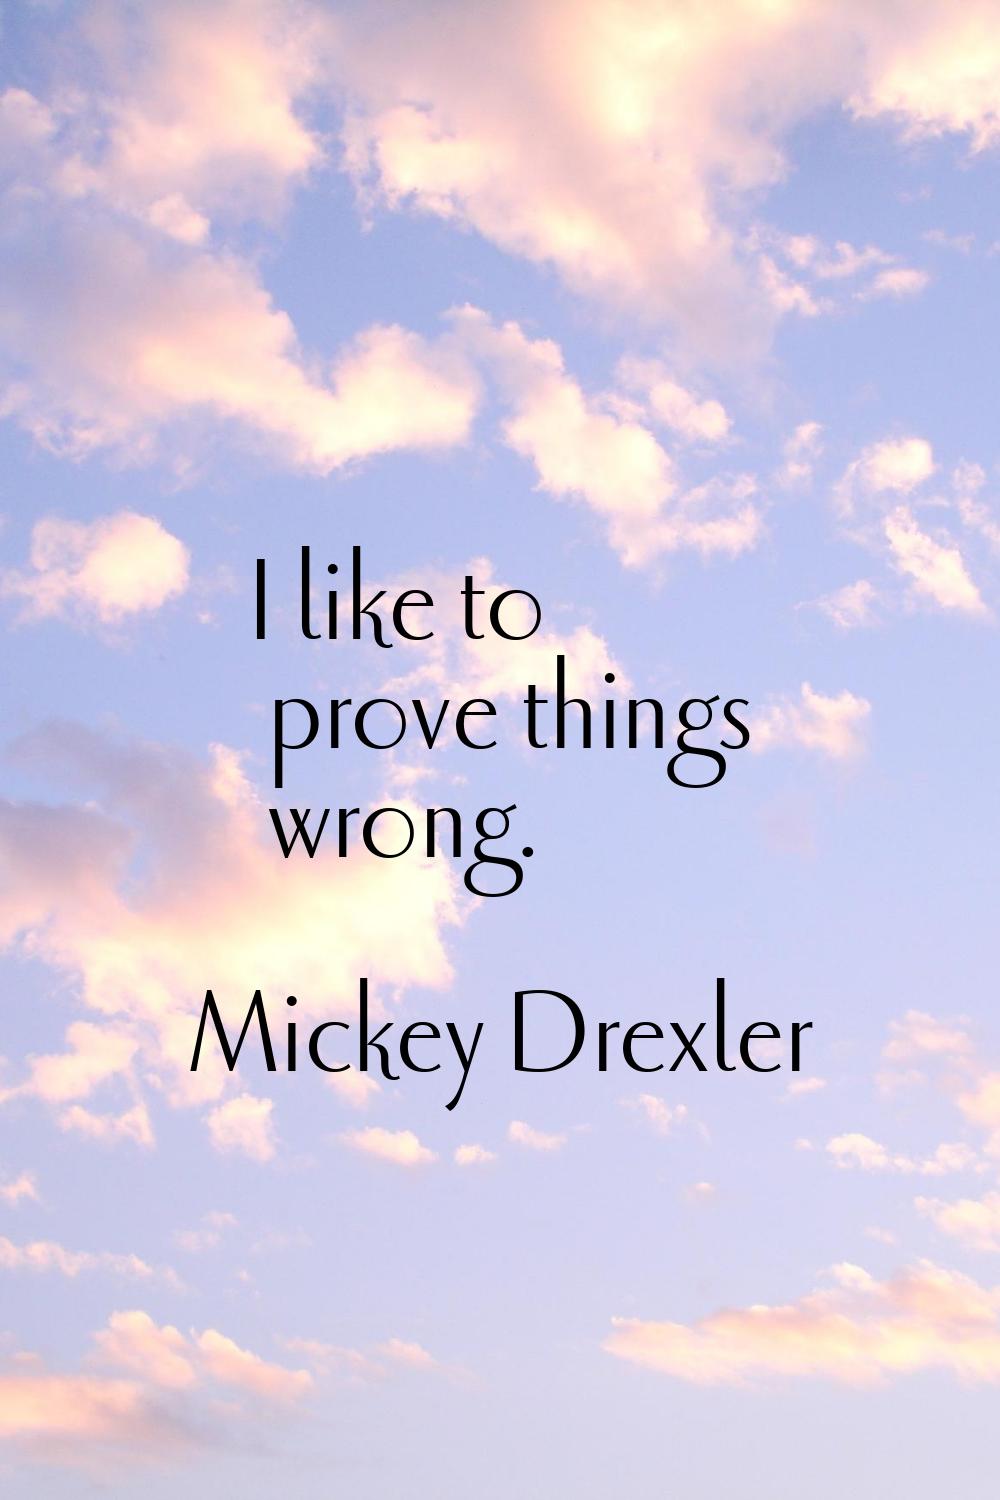 I like to prove things wrong.